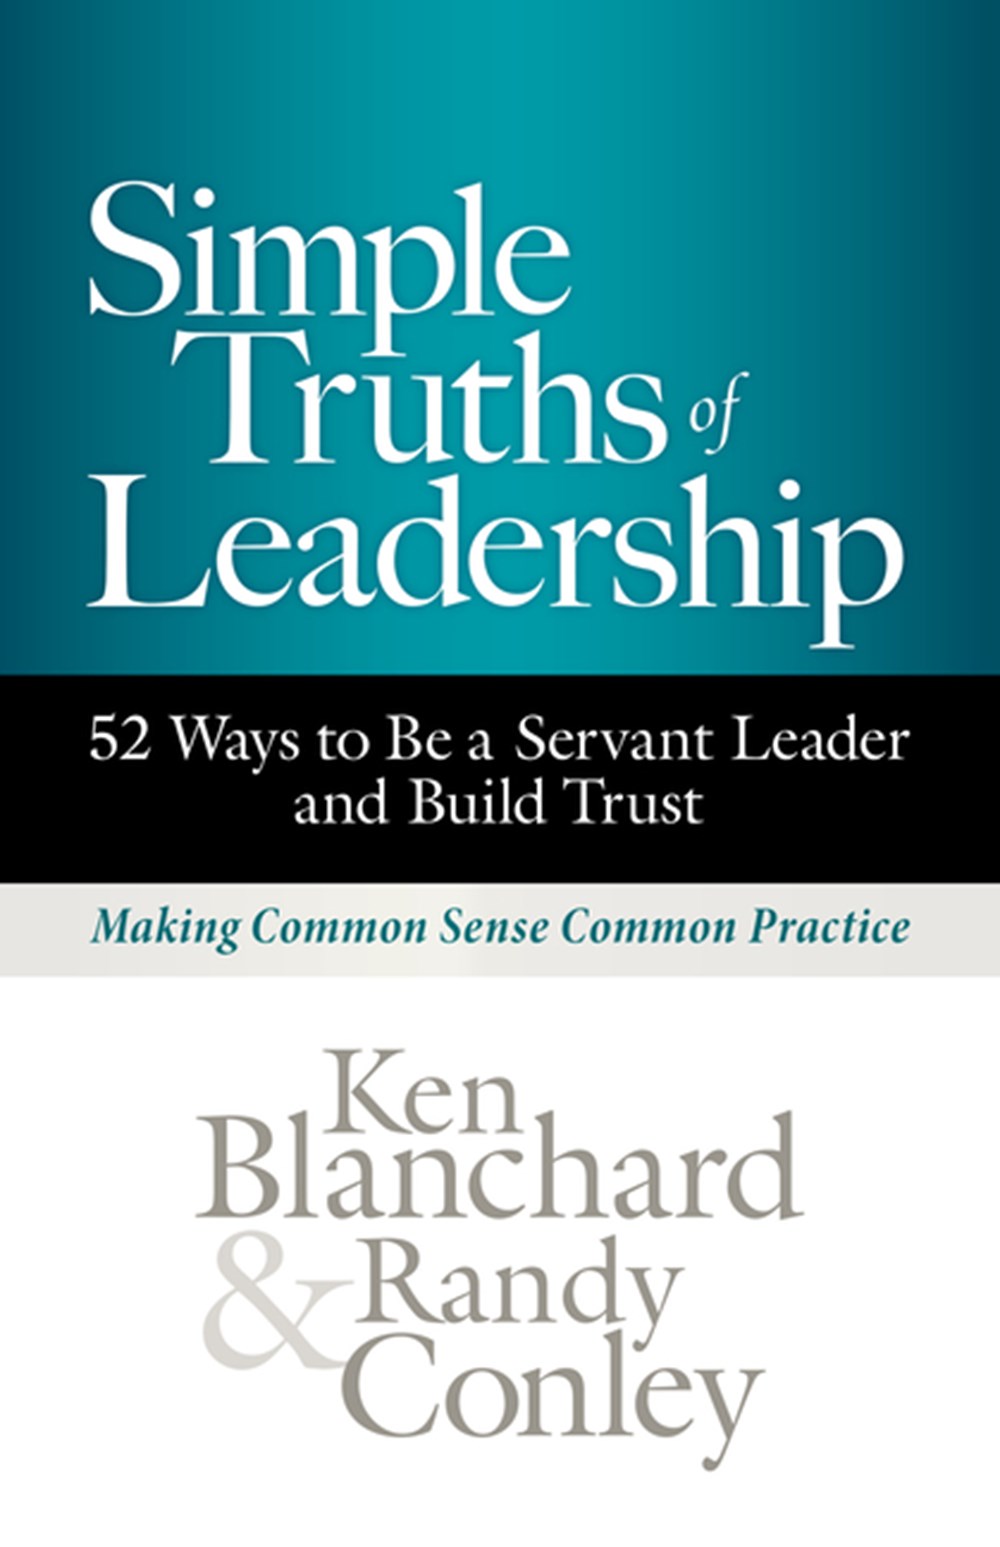 Simple Truths of Leadership 52 Ways to Be a Servant Leader and Build Trust